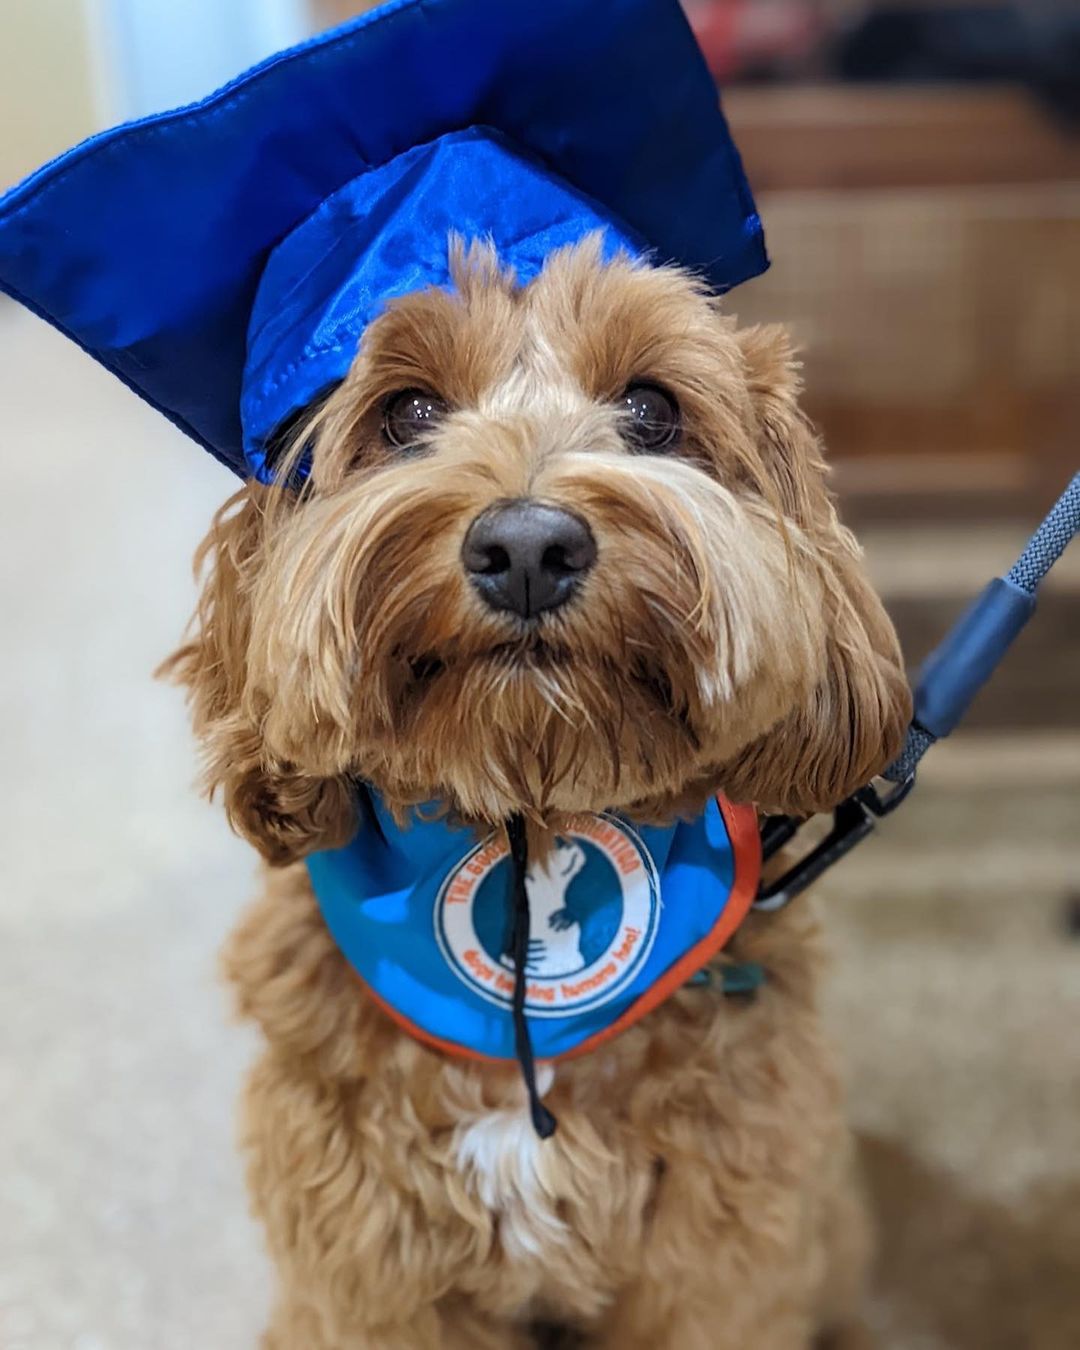 terrier wearing a graduation cap and sash.